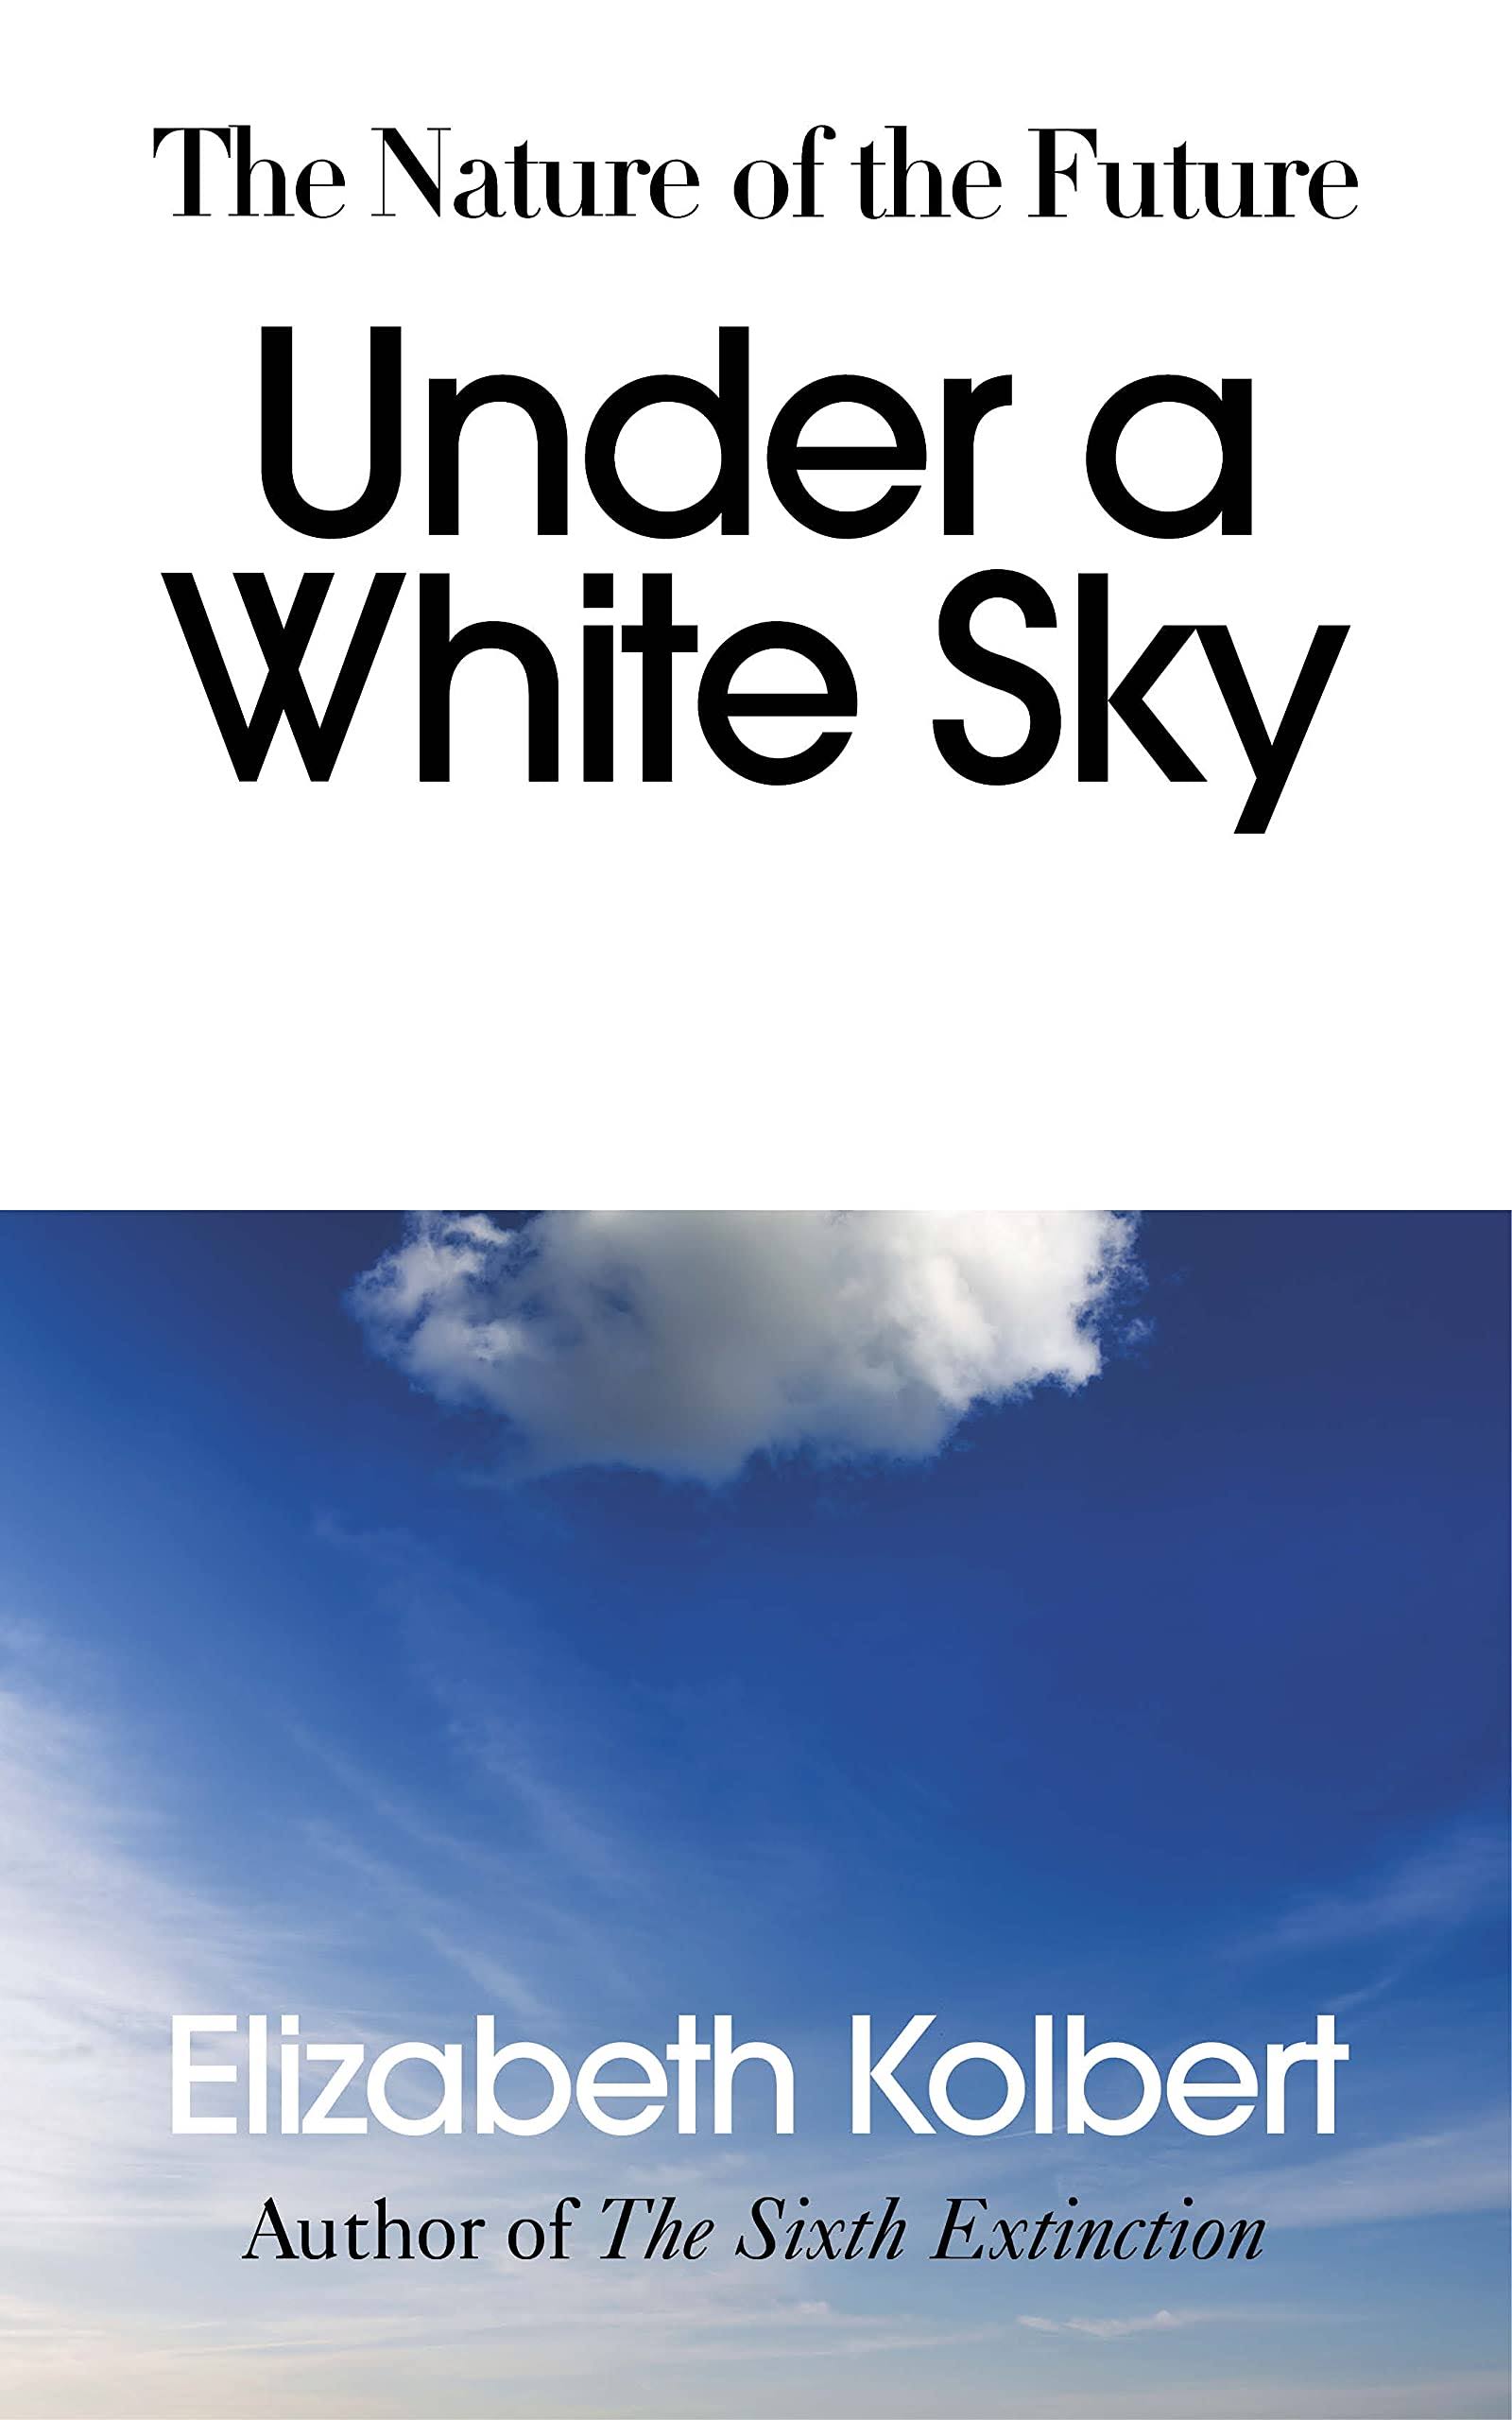 Under a White Sky: The Nature of the Future [Book]